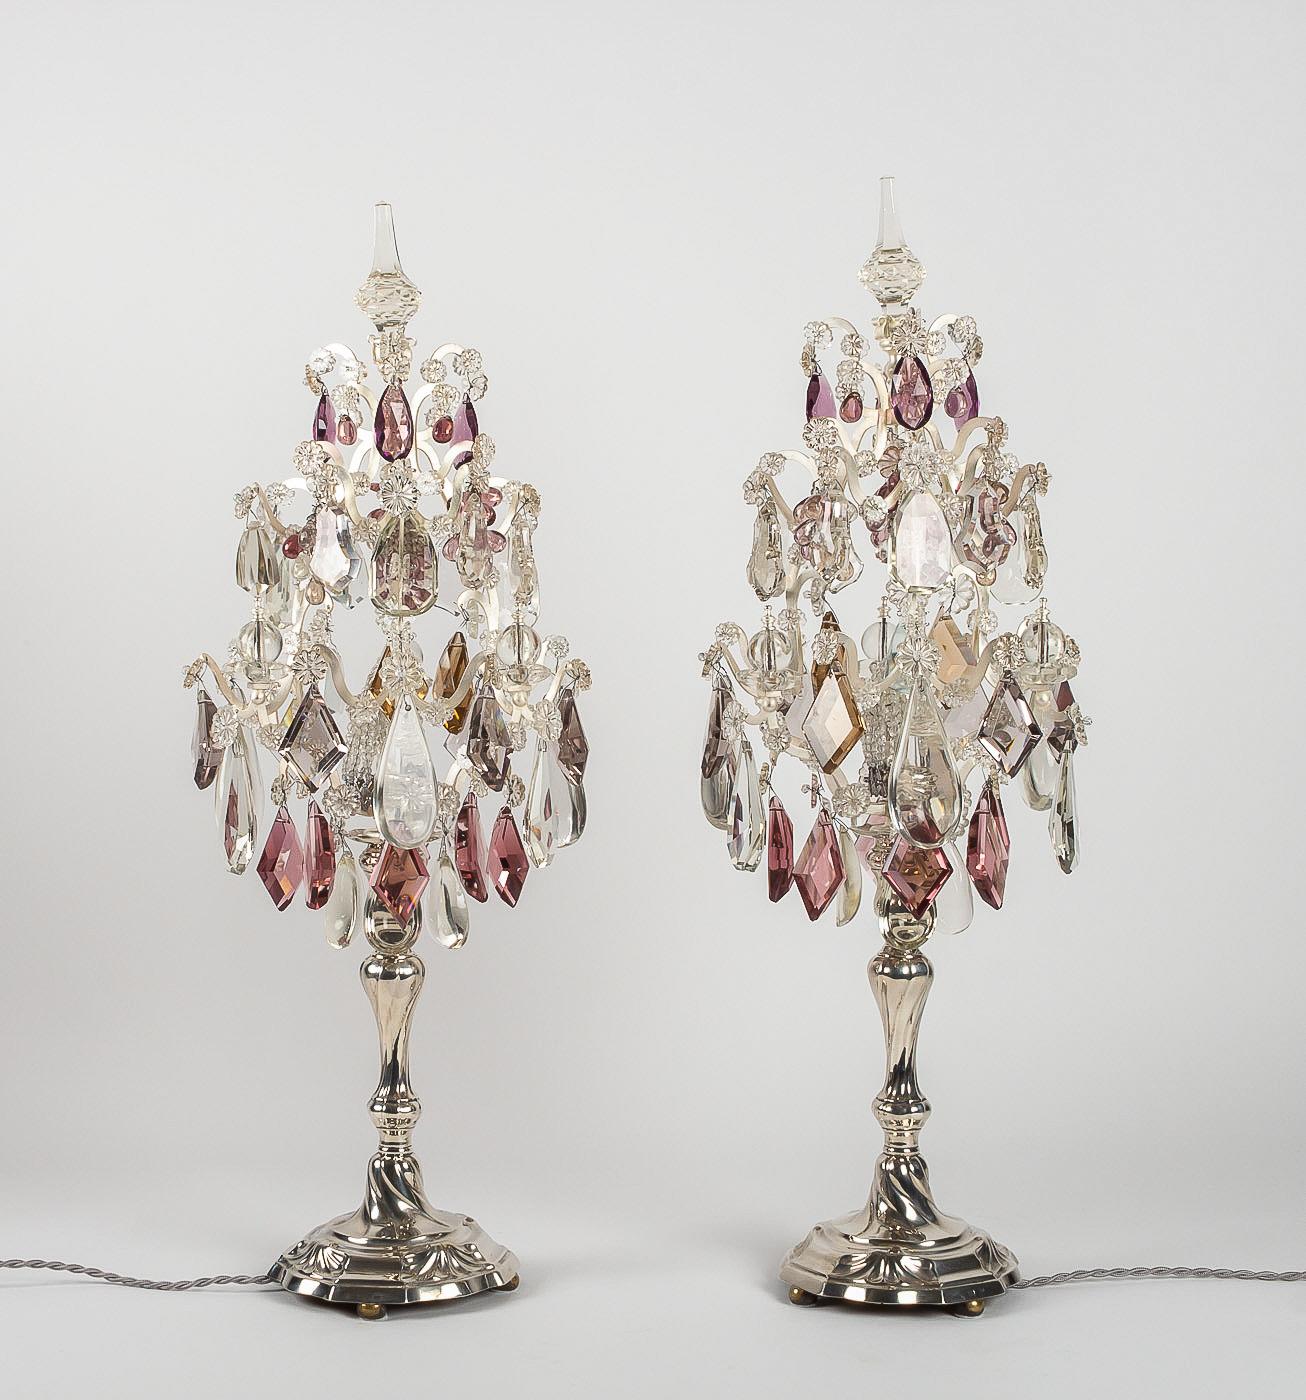 Pair of silver candlesticks converted in Girandole lamps Belgium, circa 1772.

Elegant and decorative pair of silver candlesticks converted in girandole candelabra lamps.
Fine quality cut crystal decoration with white and Amethyst colored crystal